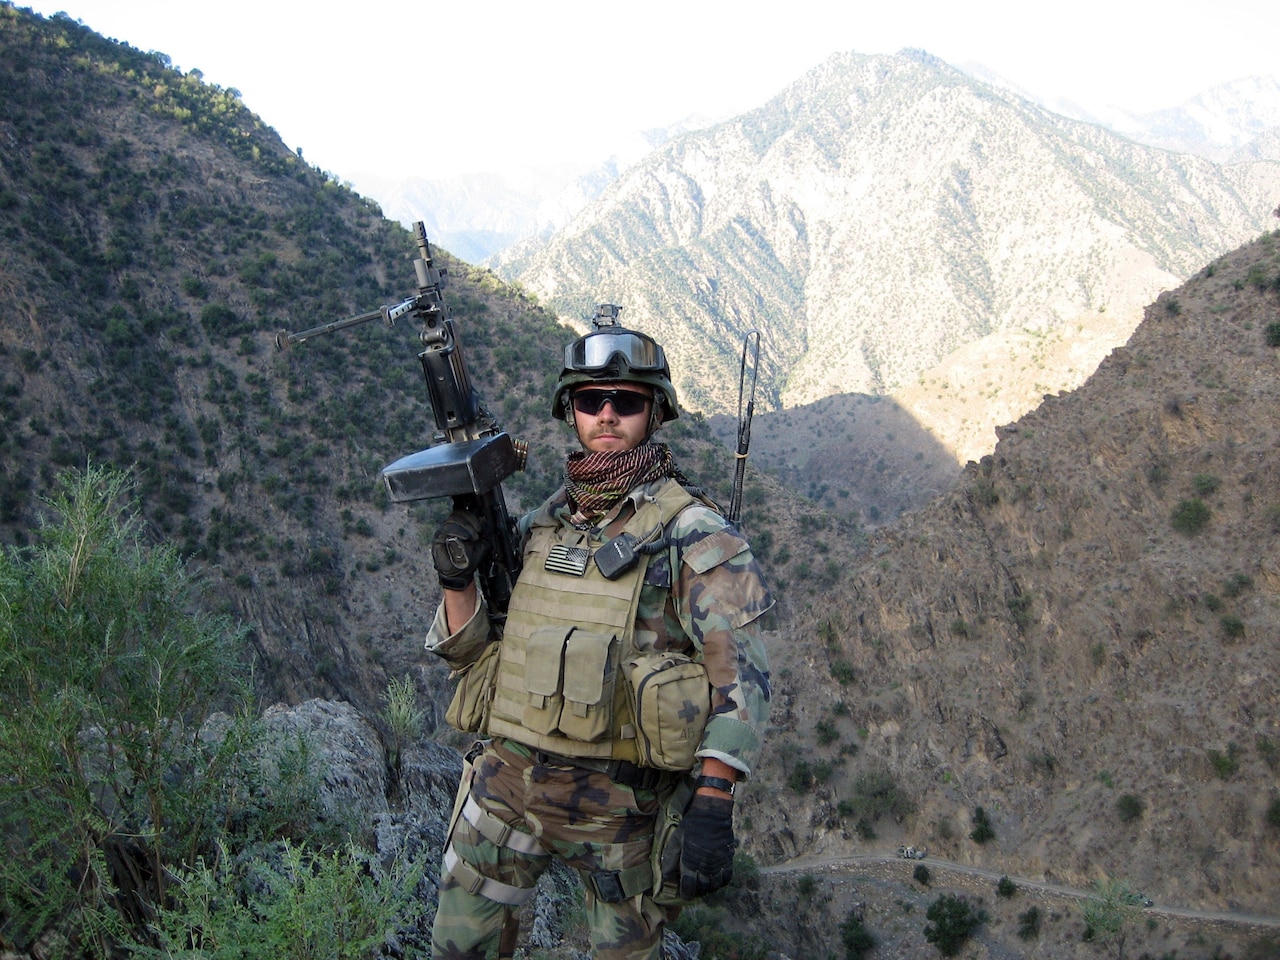 A man in combat gear points a large weapon into the air. Mountains line the background.